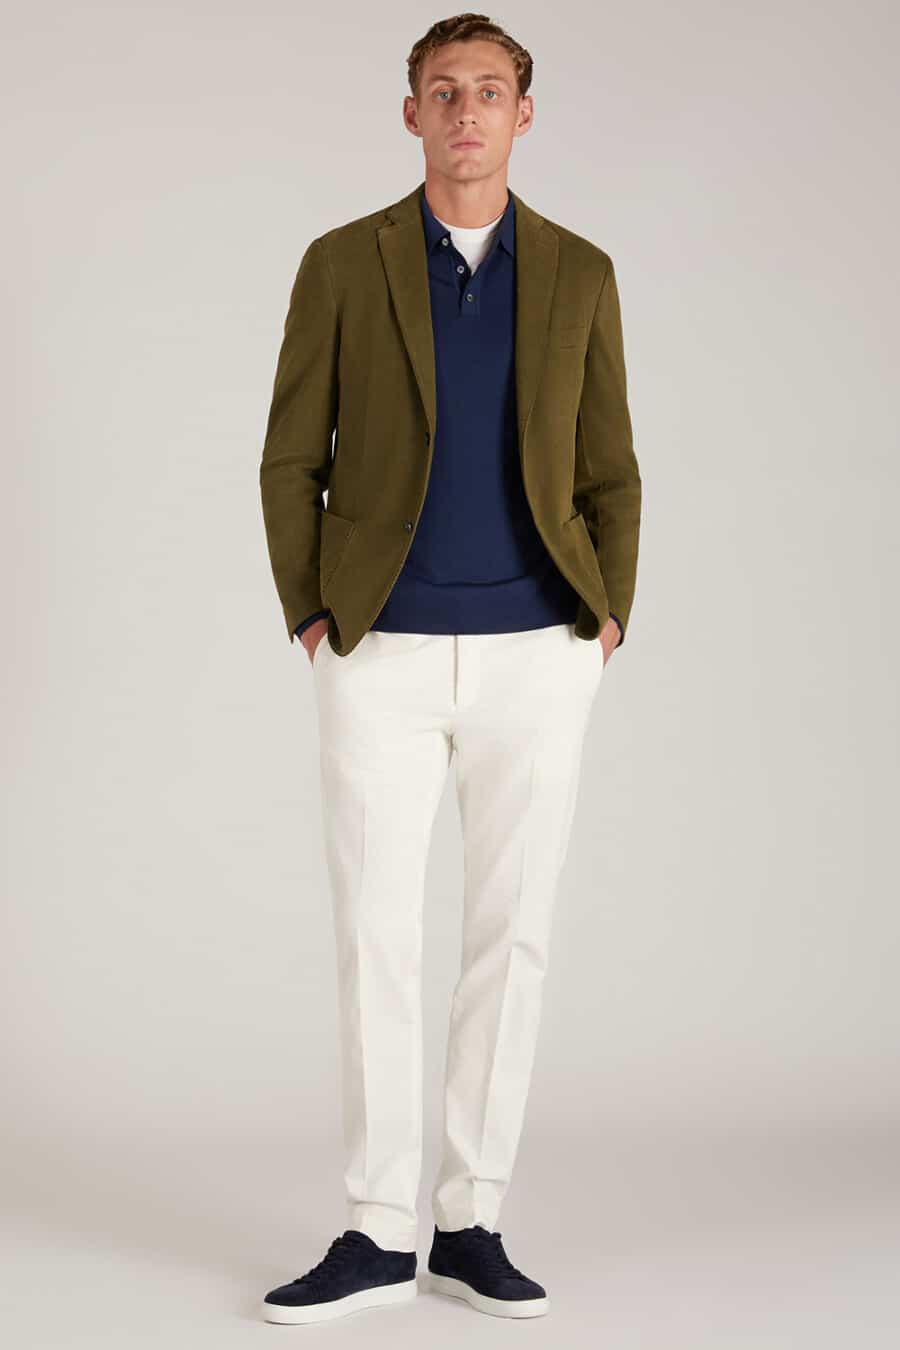 Men's white pants, navy polo shirt, olive blazer and navy sneakers